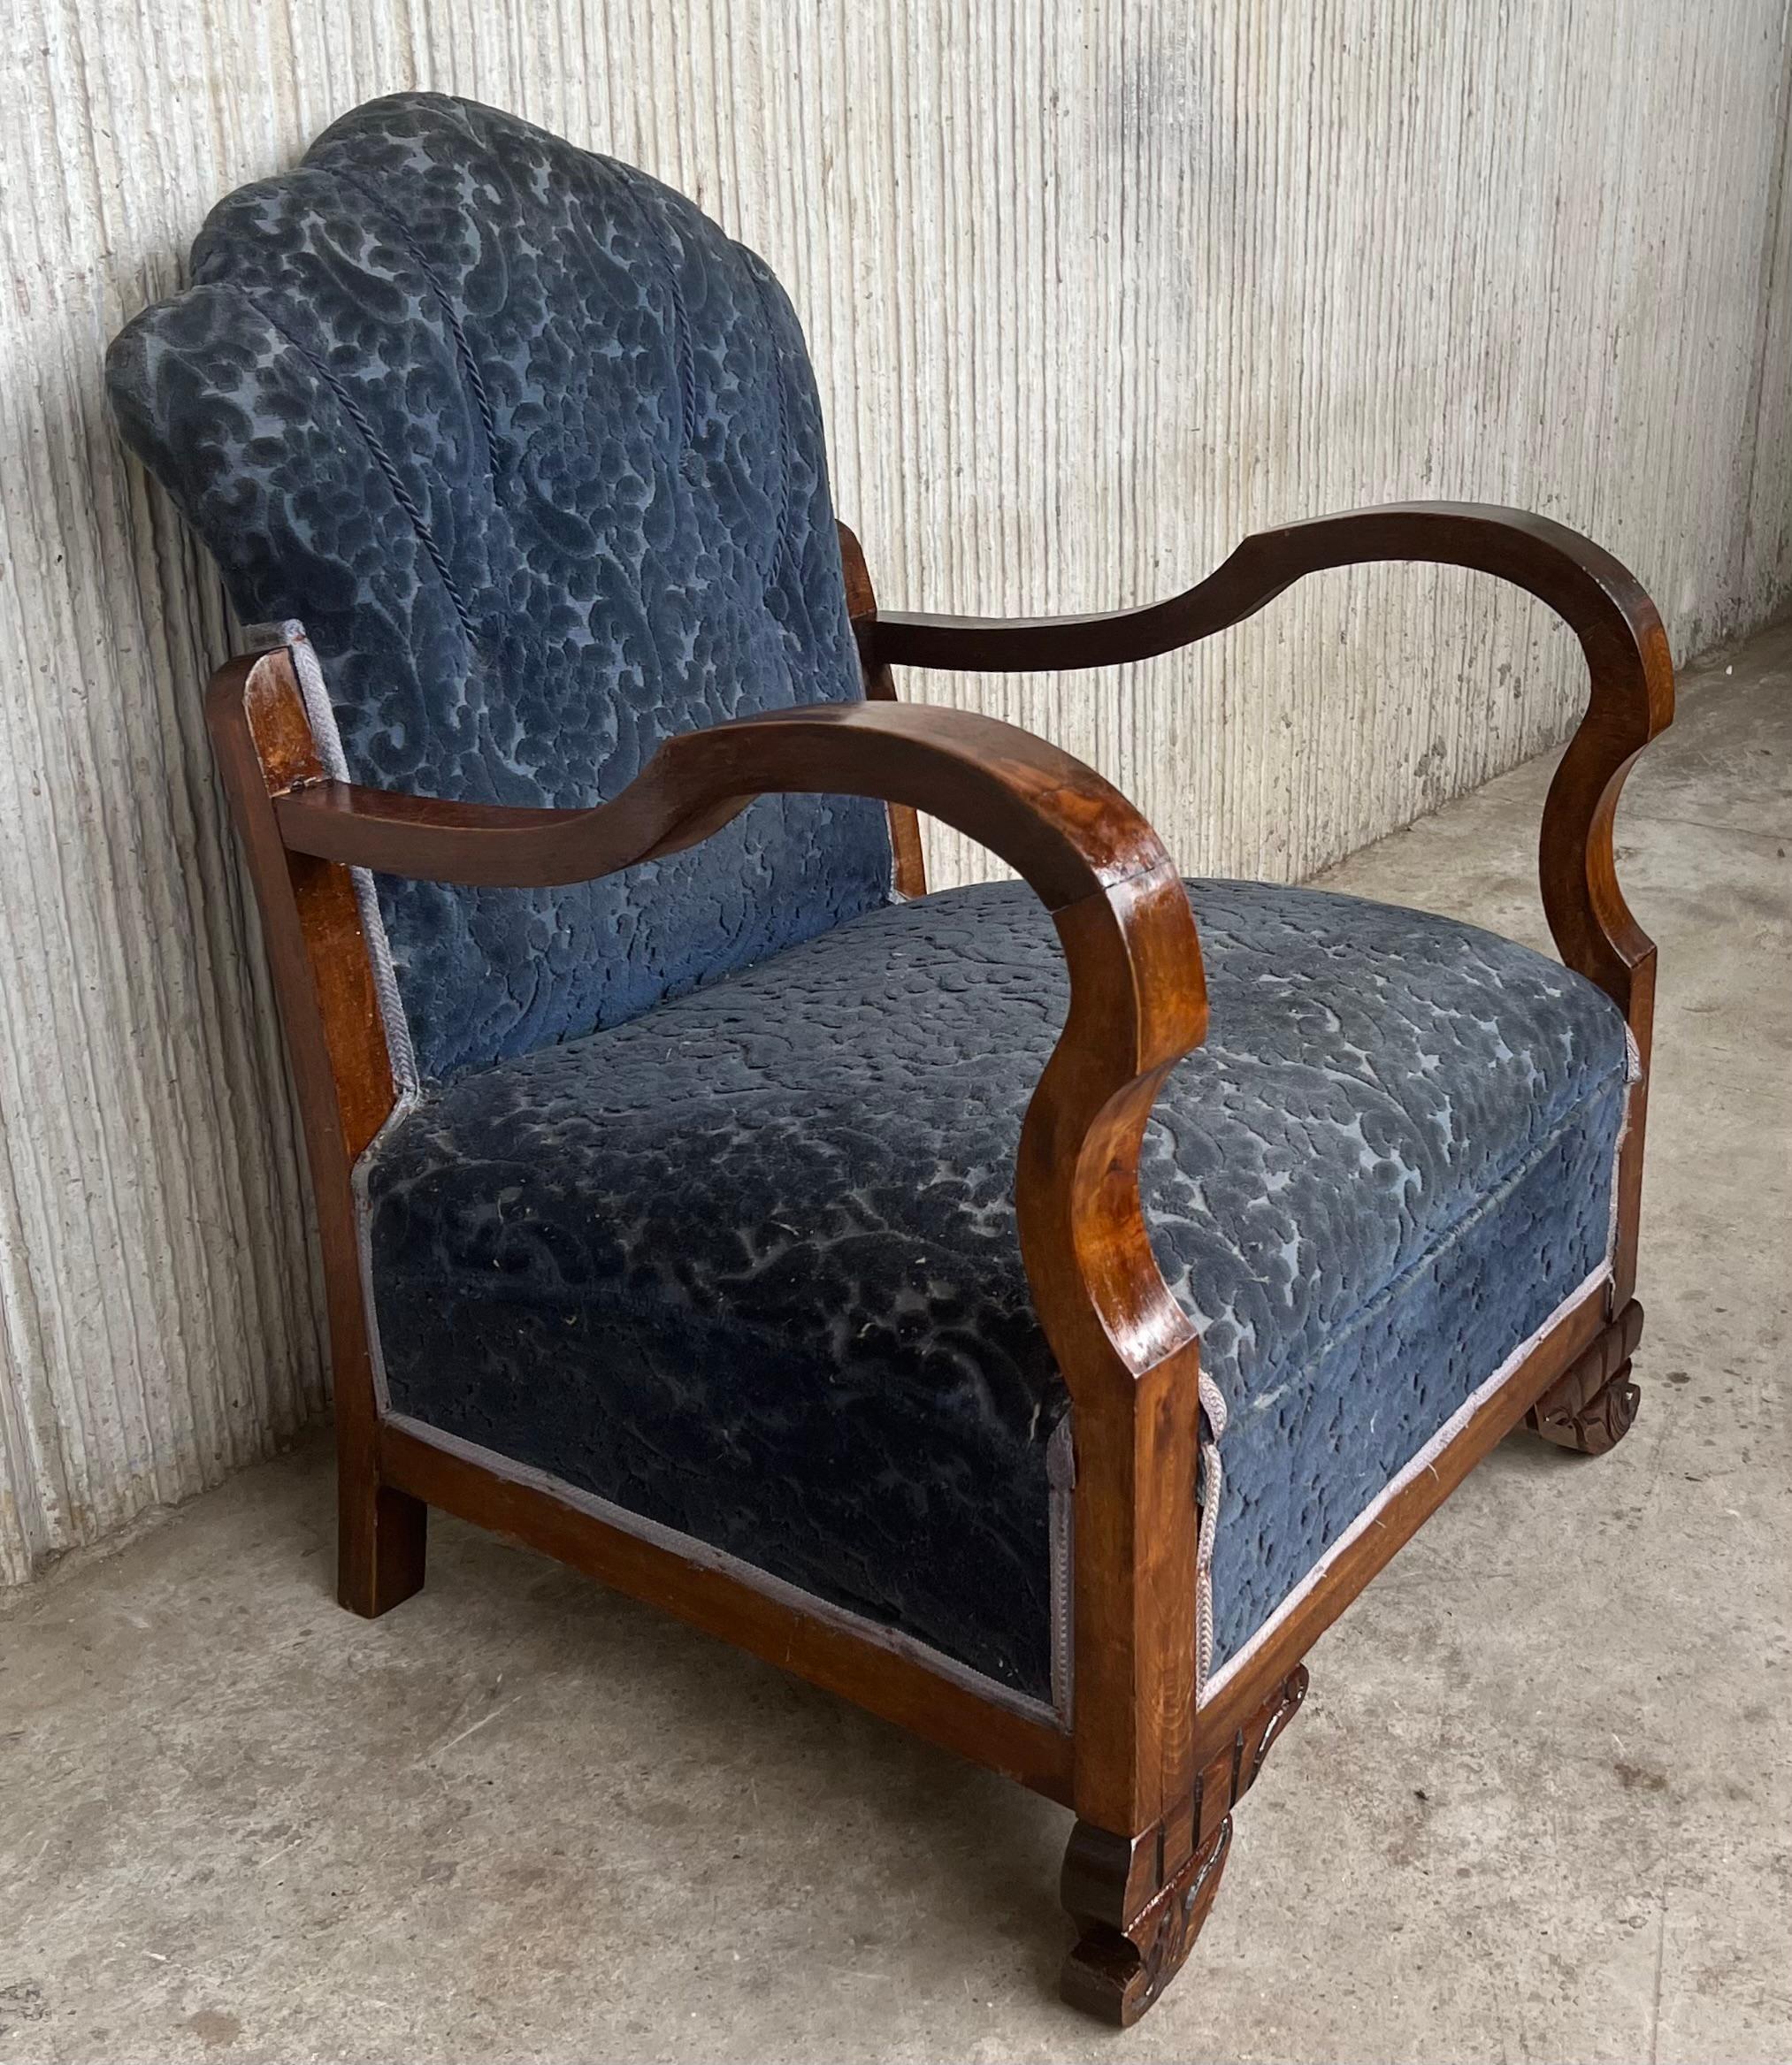 Pair of Art Deco club armchairs with blue ink damask velvet
Very comfortable armchairs with turned walnut armchairs
It has two carved legs and bottoms in the back.